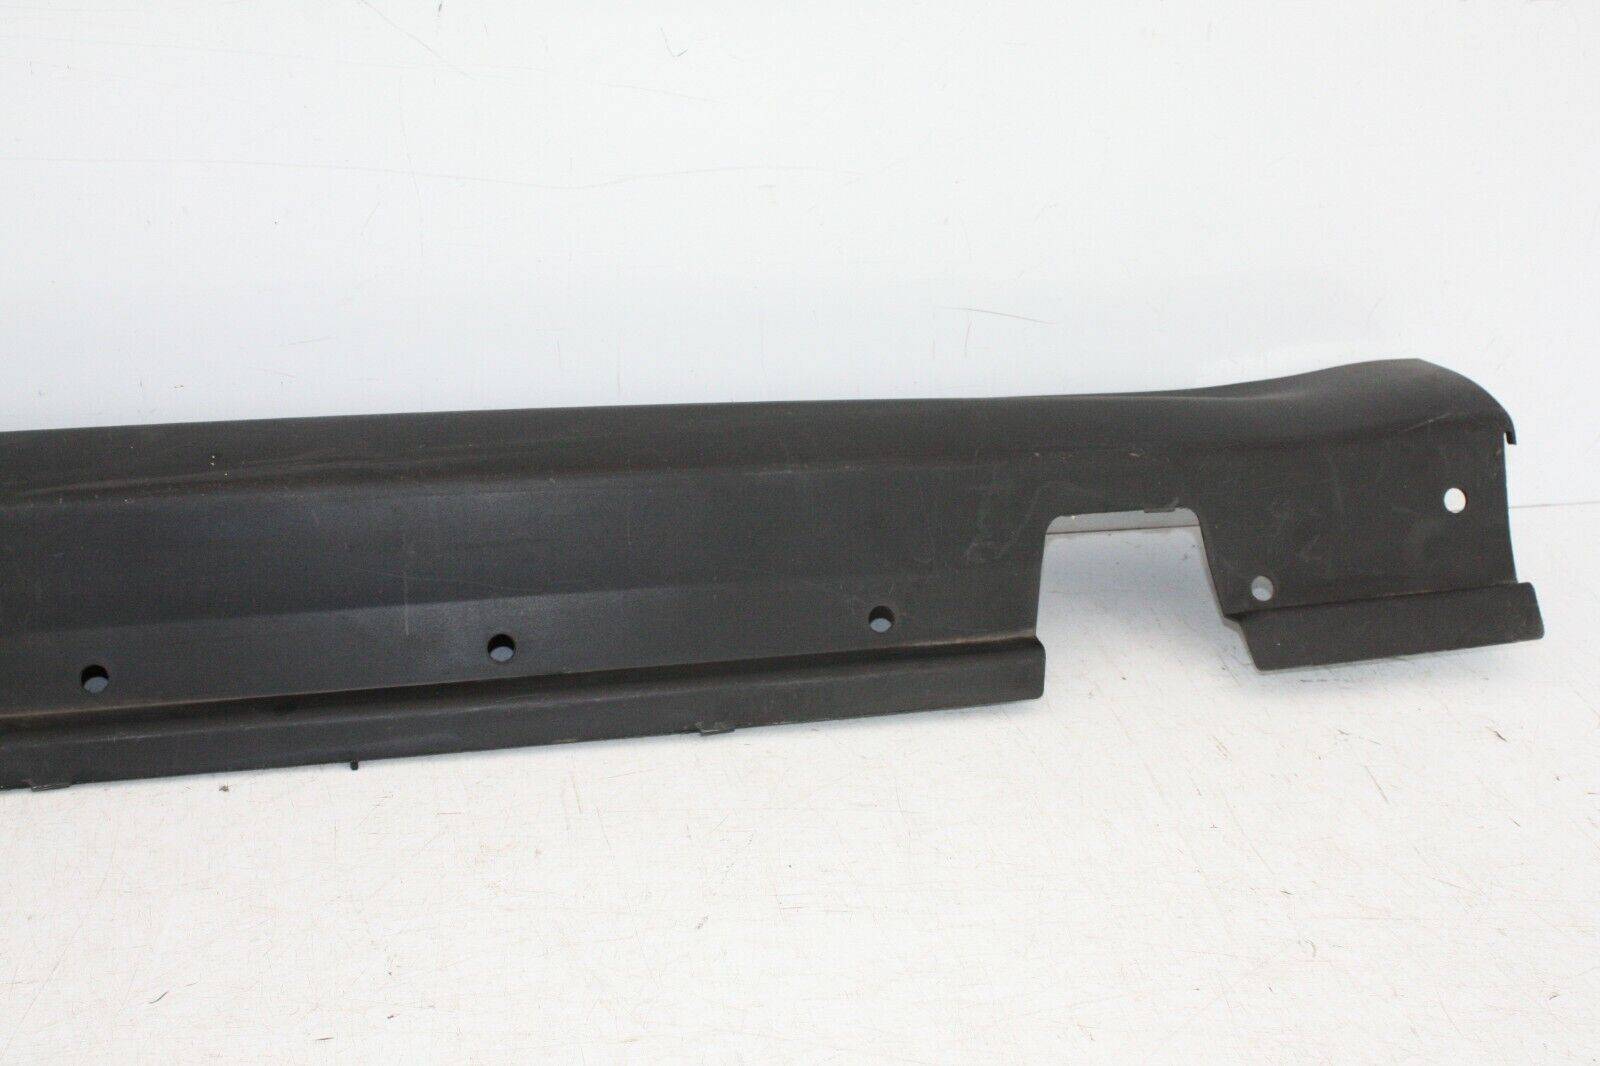 MINI-COOPER-R56-RIGHT-SIDE-SKIRT-2006-TO-2013-7147916-175367545027-10